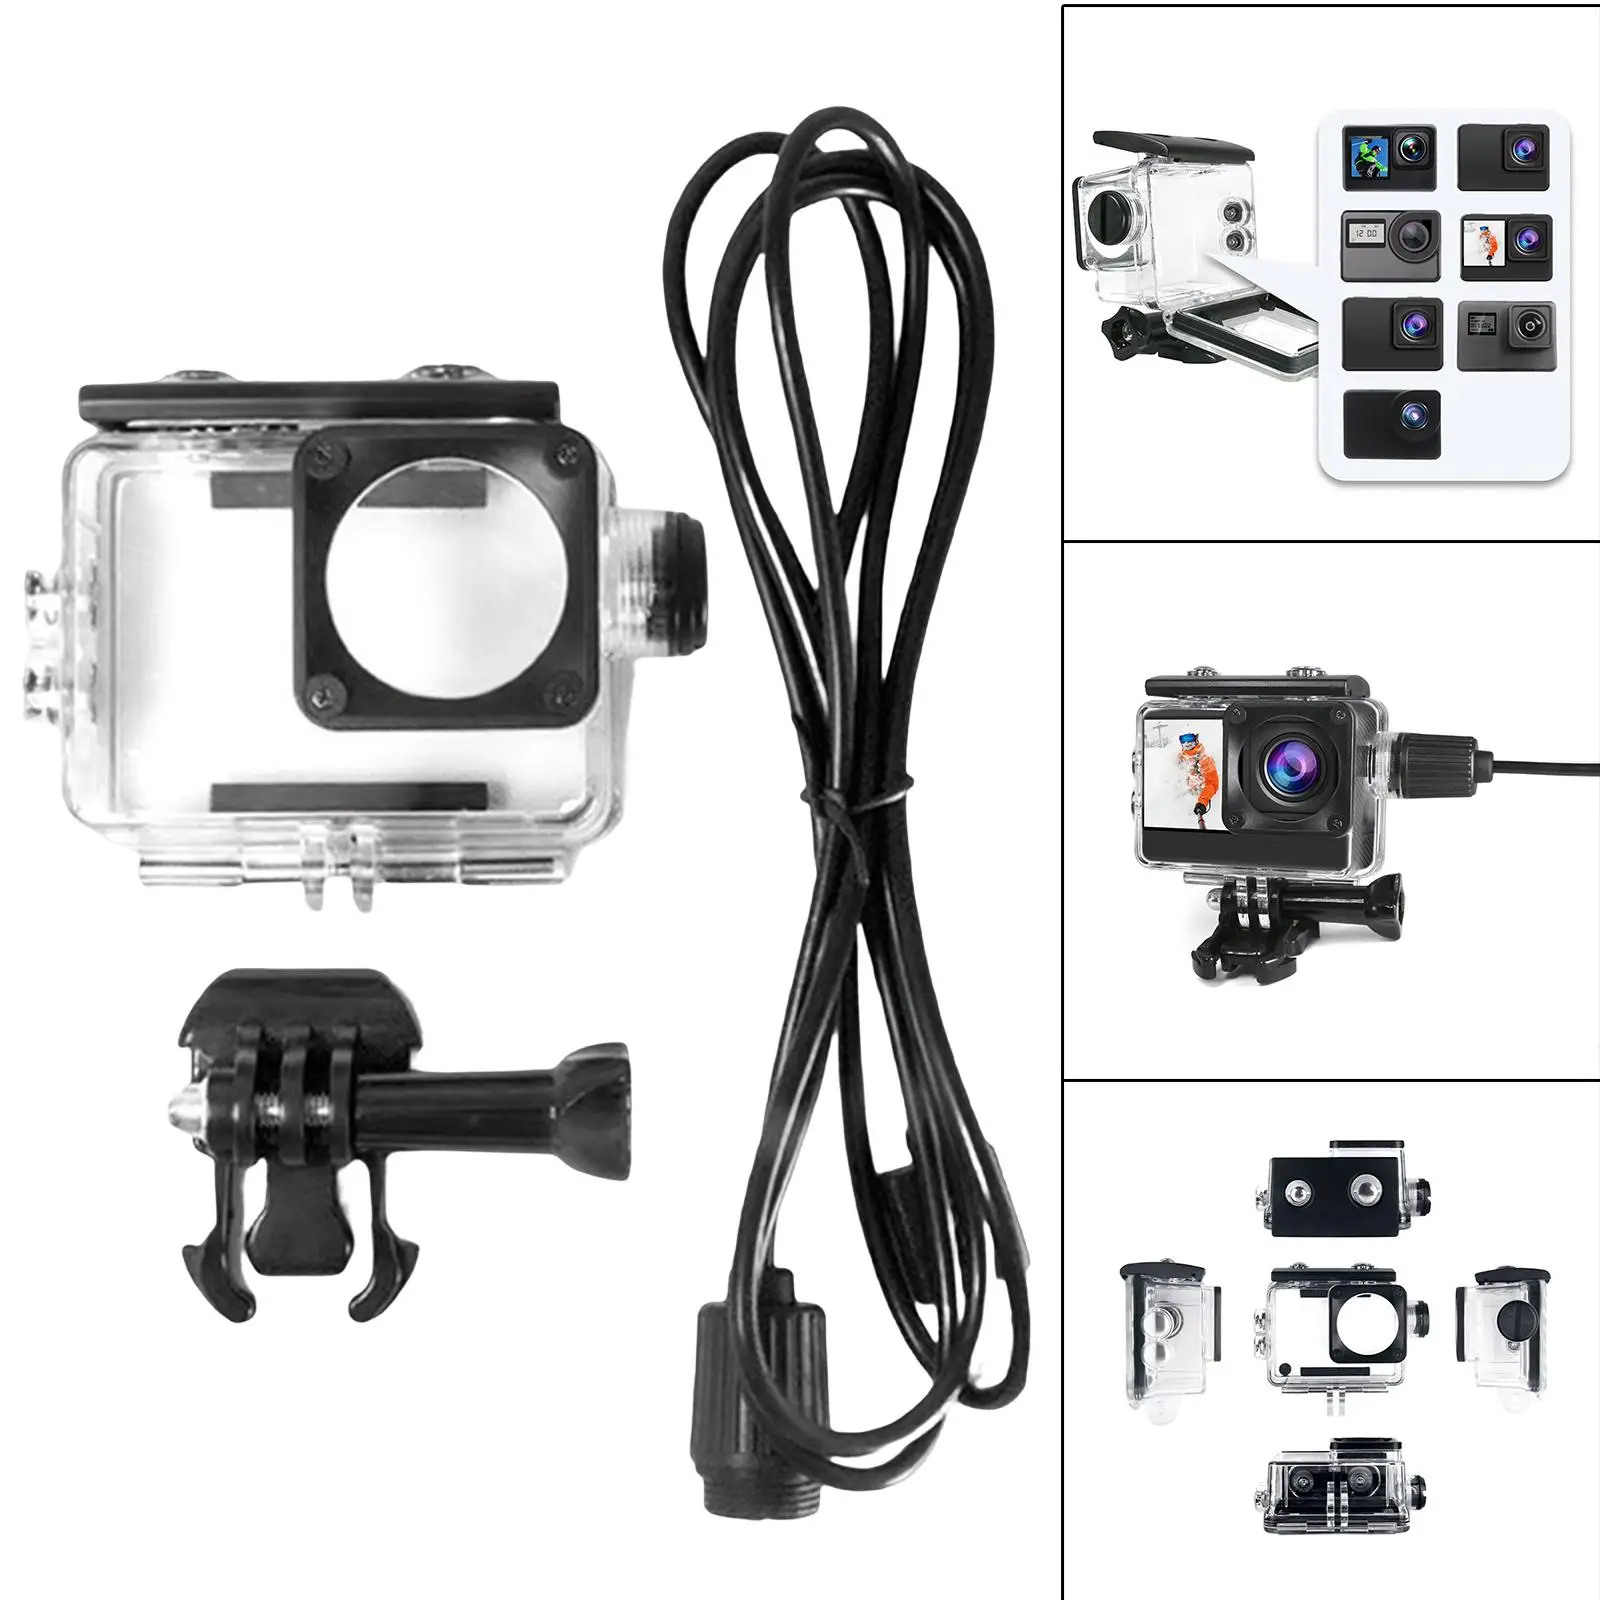 Action Video Cameras Waterproof Housing Case, Protect Cover Protective Dive Shell Frame Mount Transparent for 4K Eis WiFi